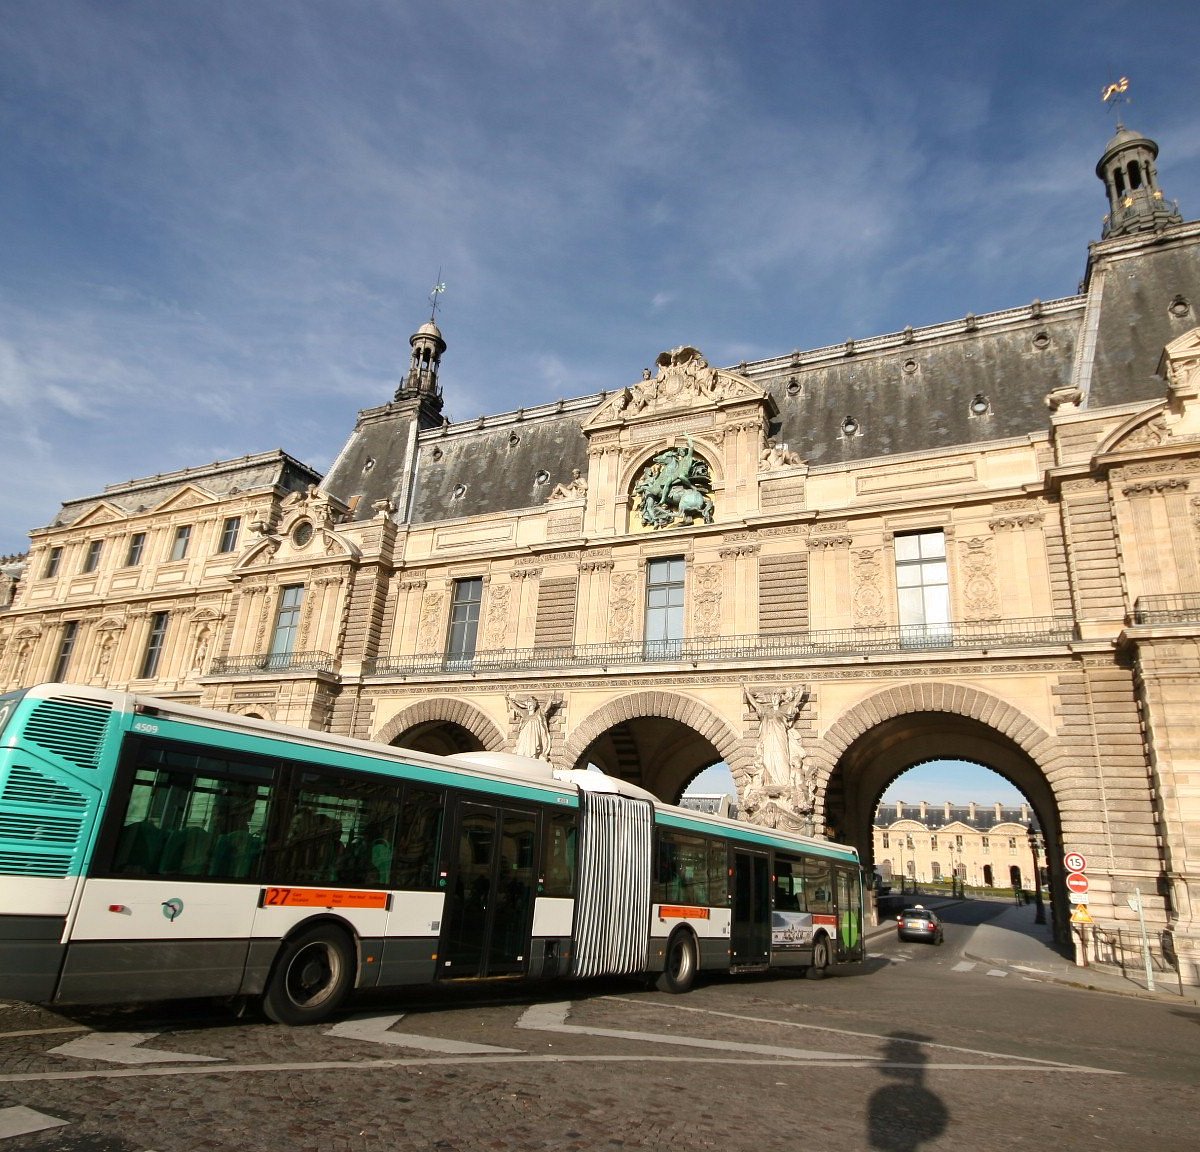 How to get to Galeries Lafayette Haussmann in Paris by Bus, RER